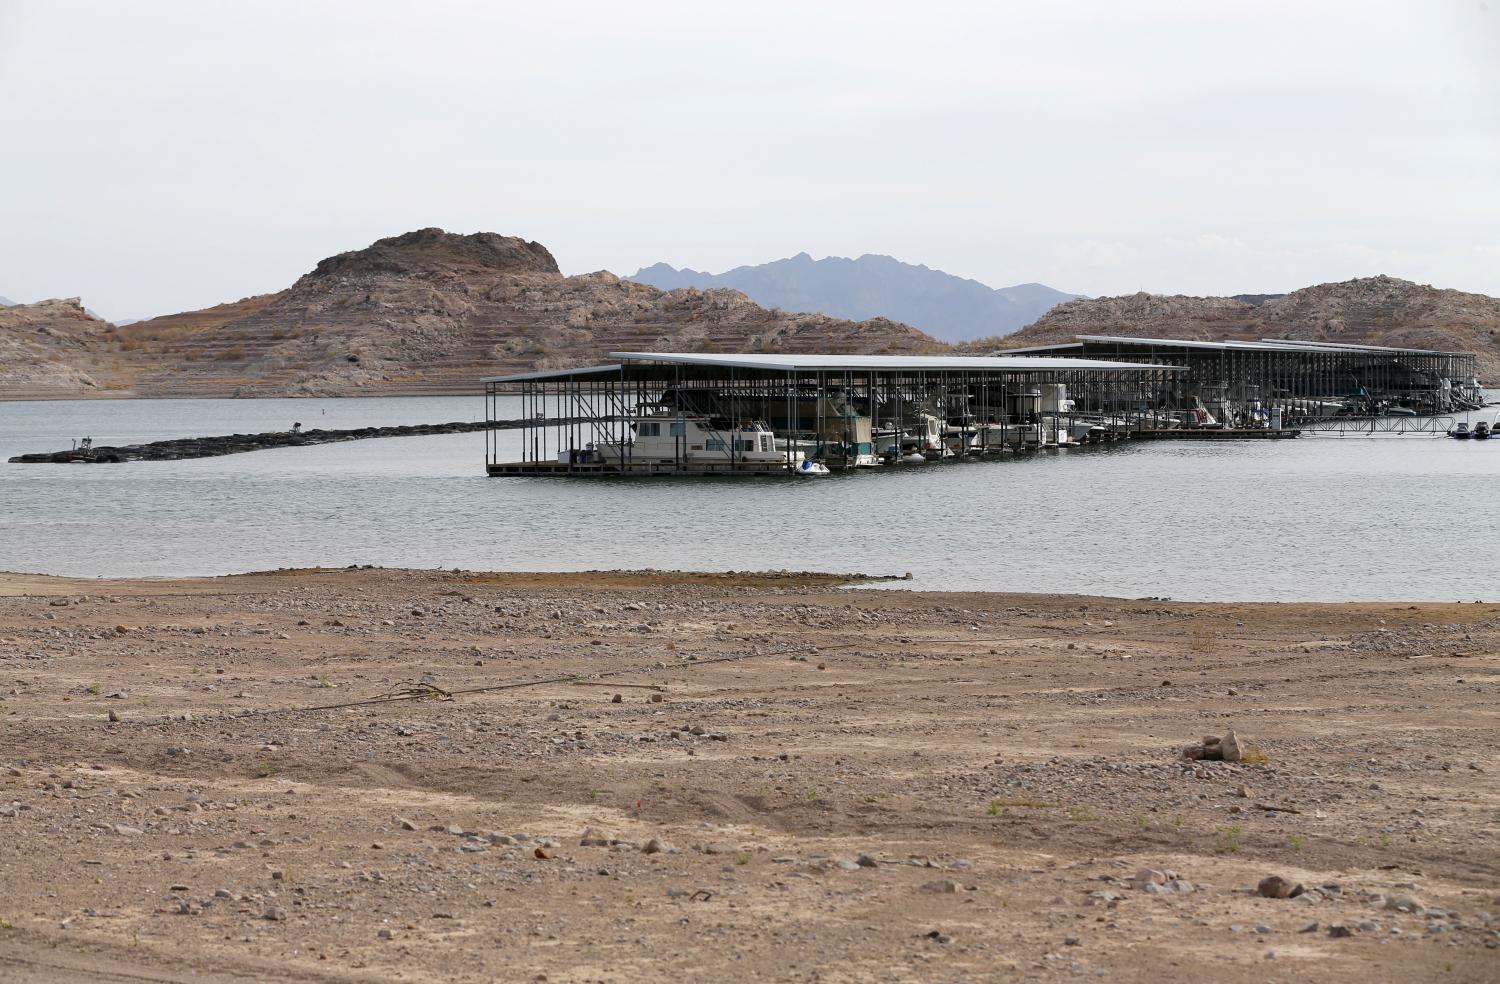 The effect of a prolonged drought in the Western United States can be seen at a marina on Lake Mead in Nevada May 6, 2015. REUTERS/Mike Blake